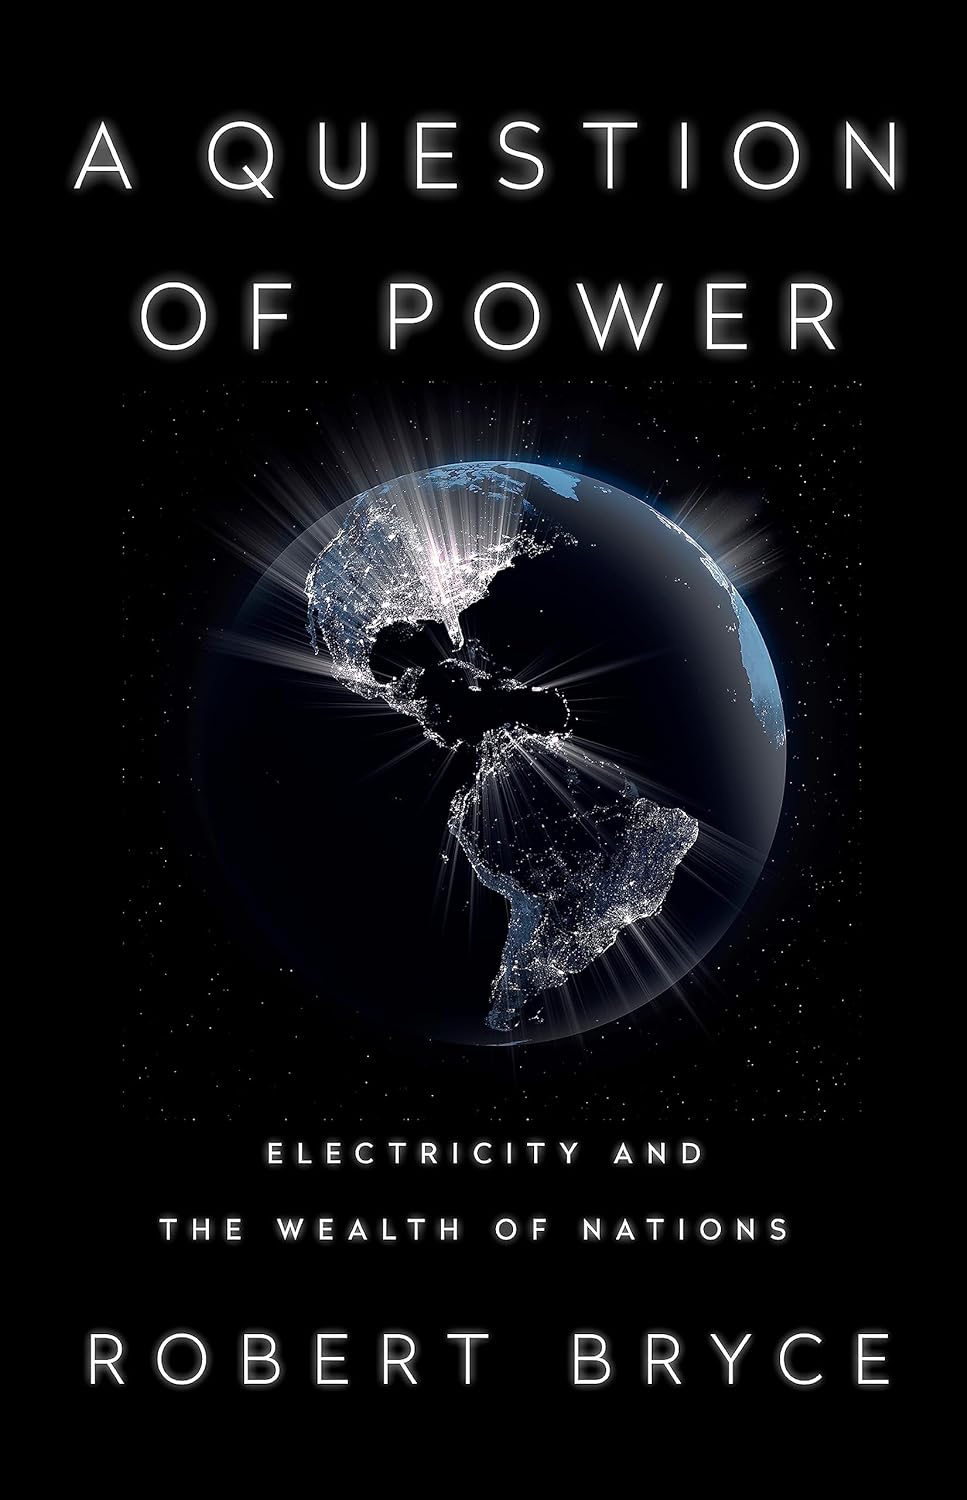 https://www.amazon.com/Question-Power-Electricity-Wealth-Nations/dp/1610397495